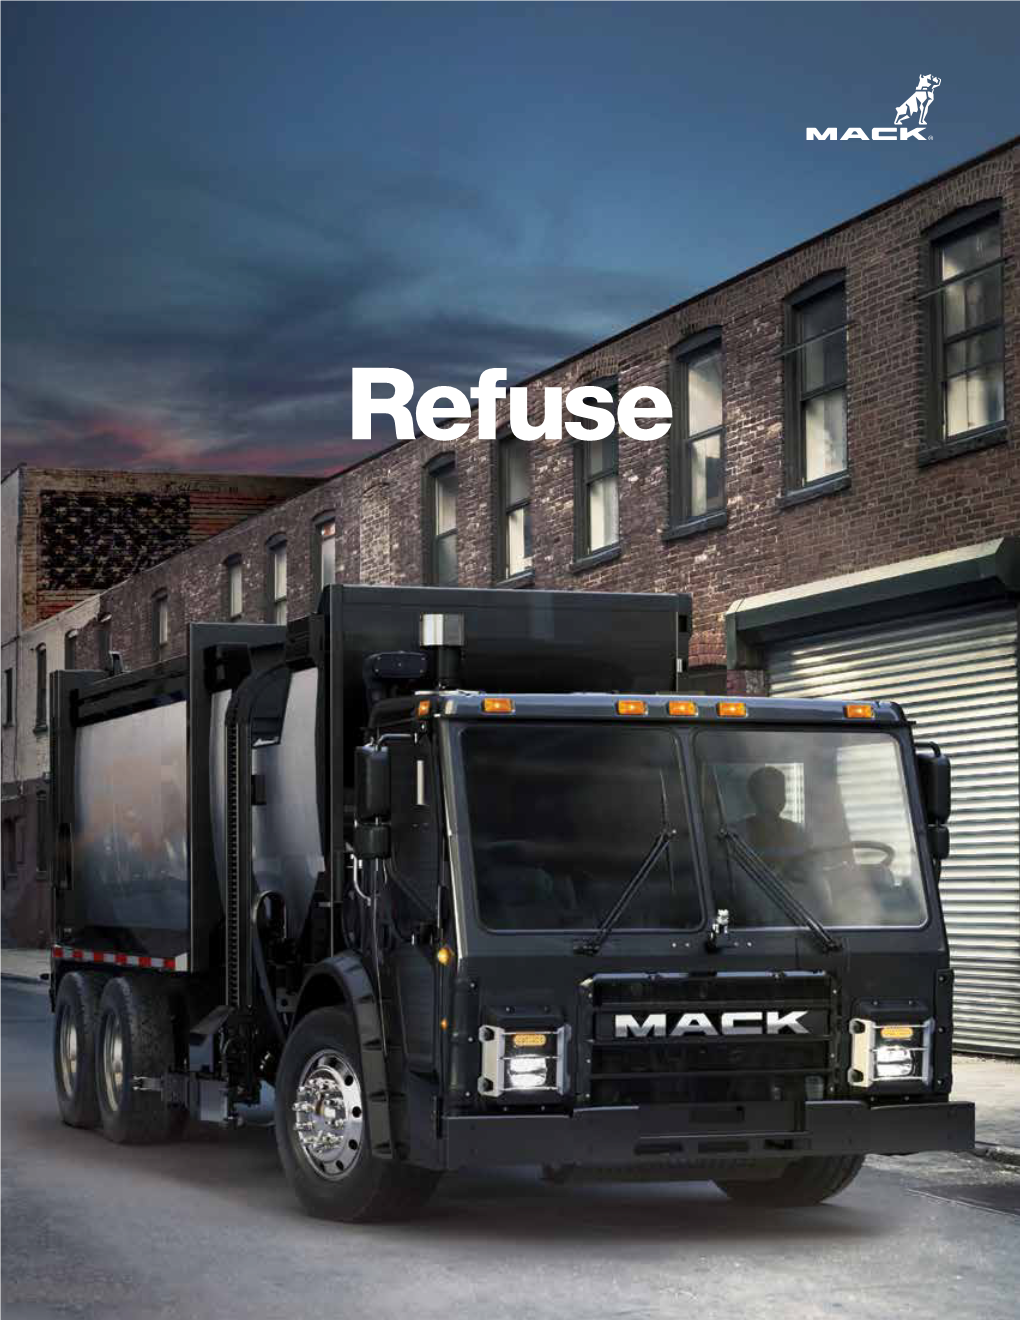 Refuse Built to Carry an Entire Industry